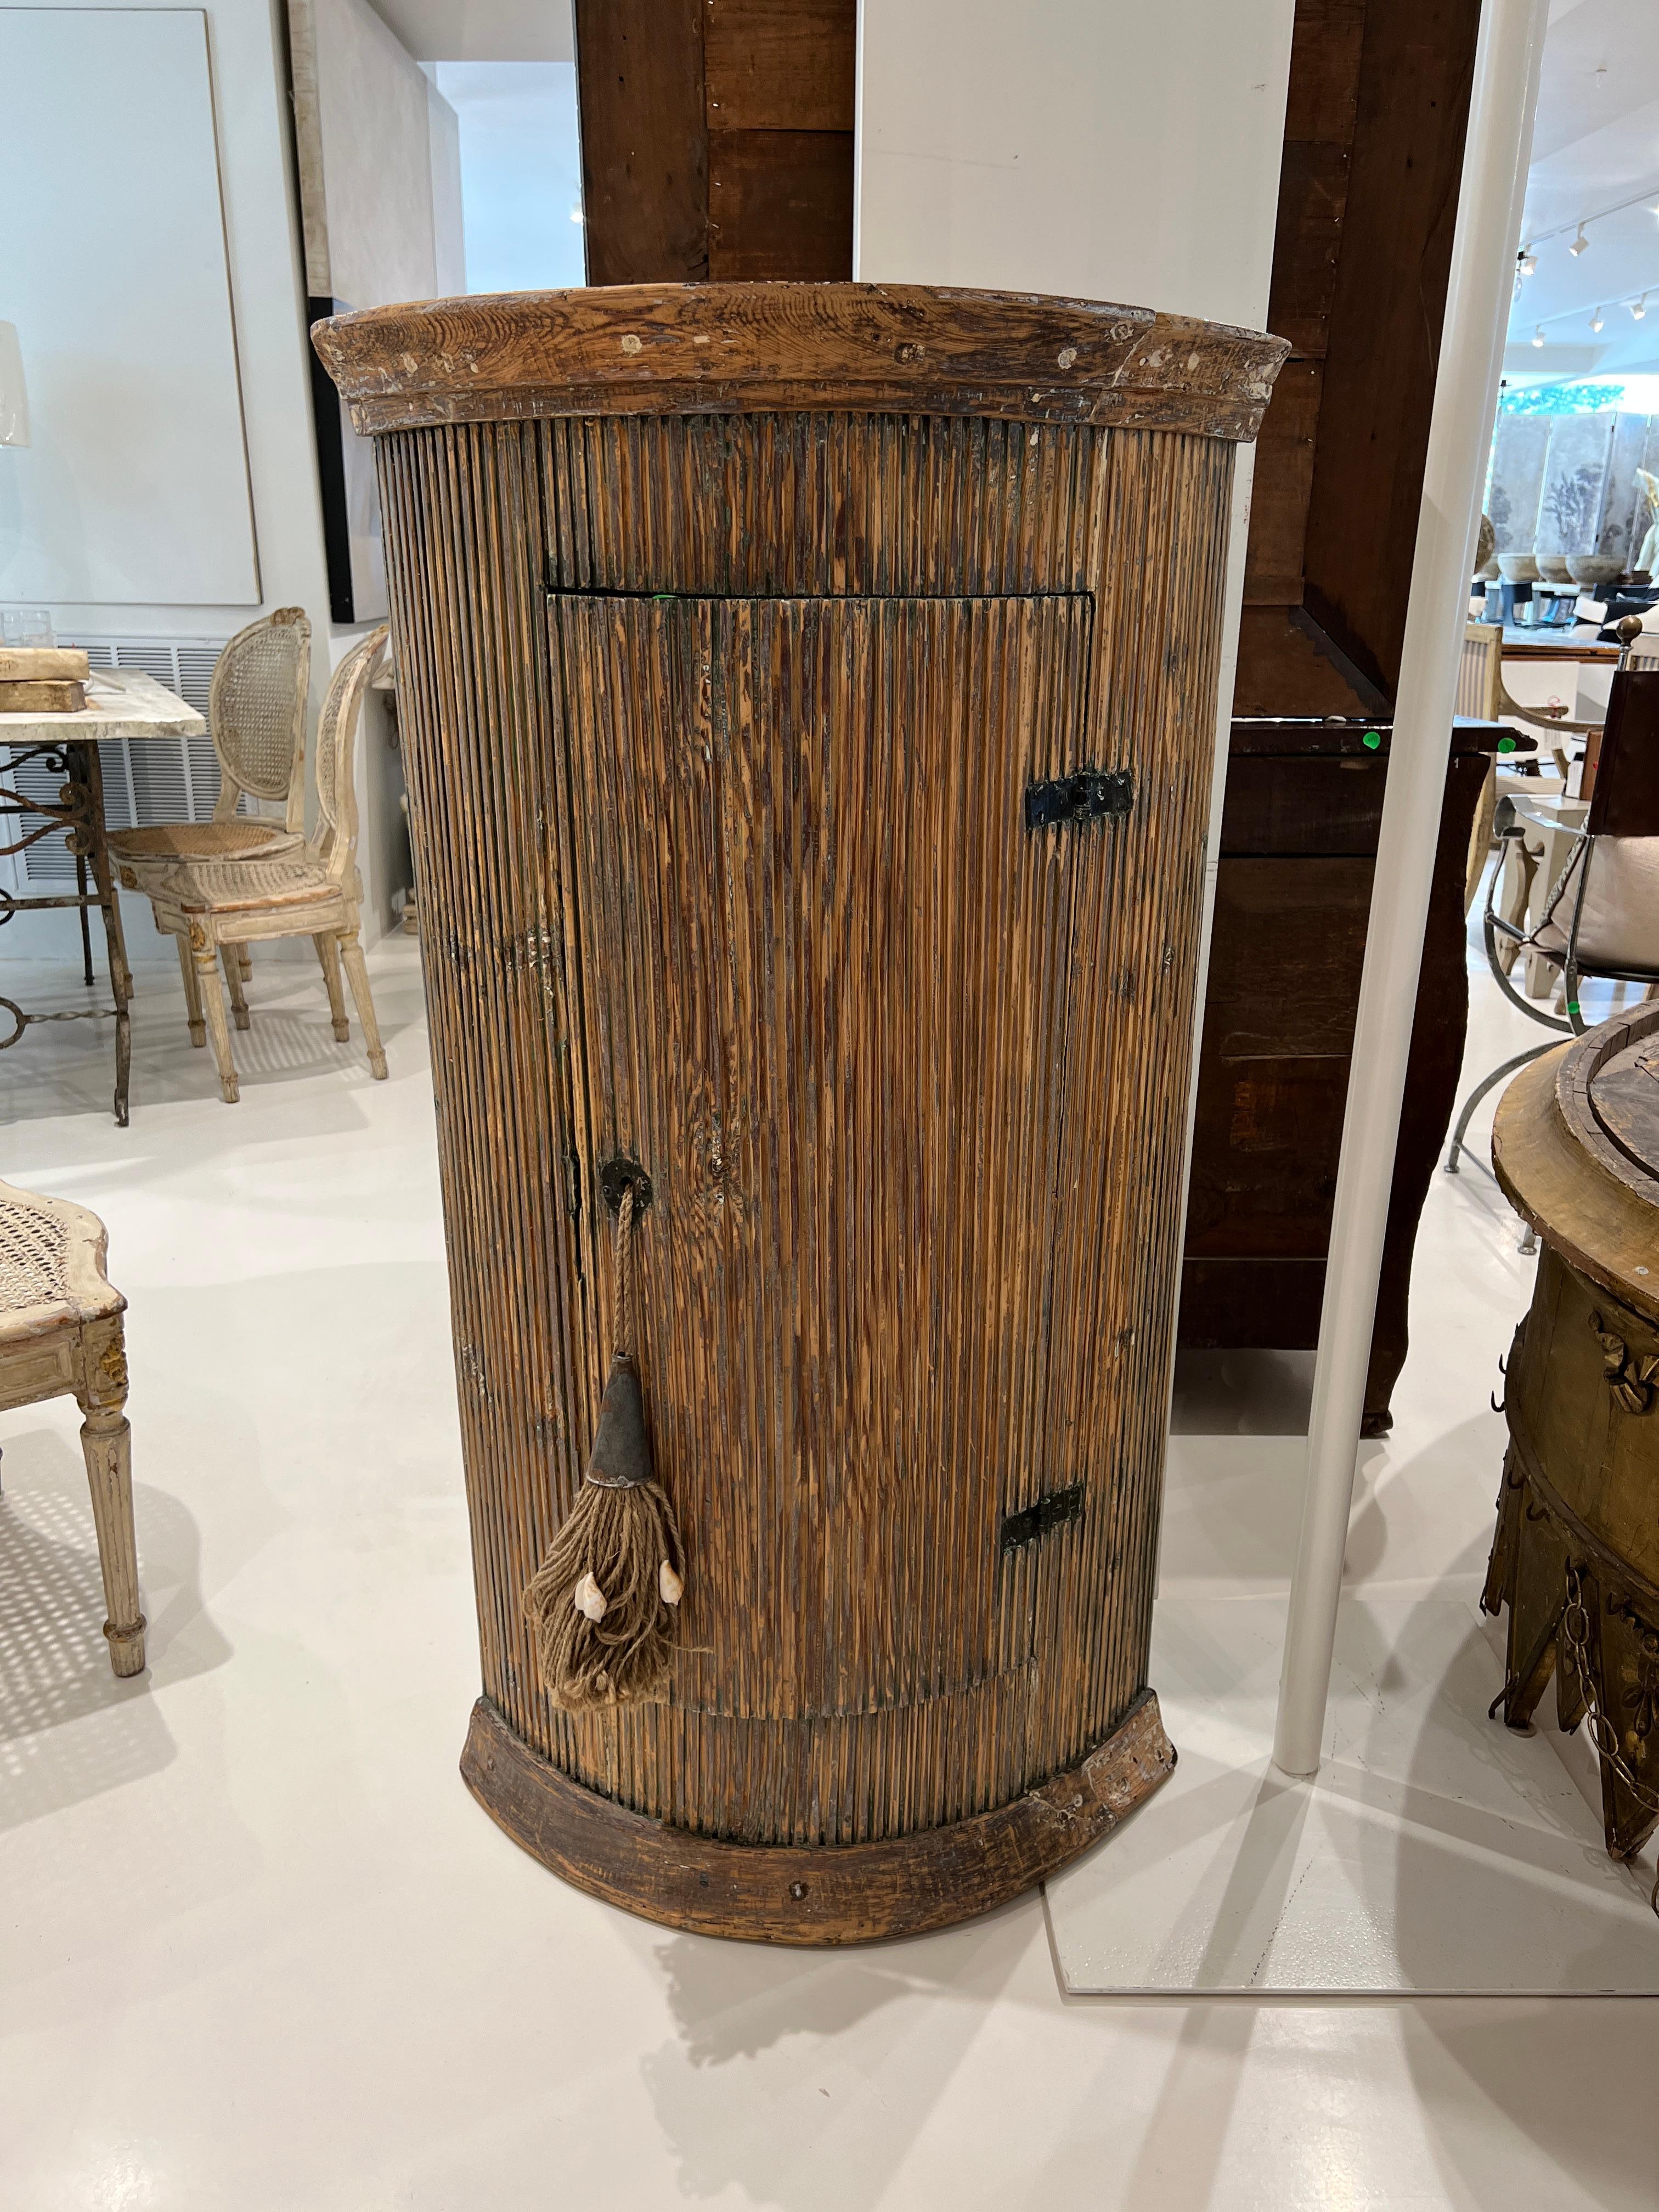 This Swedish Corner Cabinet has a scraped finish exposing shades of ochre, green and natural wood.  The interior is painted olive green.  There is beautiful fluting all around and a full length door with rustic hinges.  The height of the cabinet